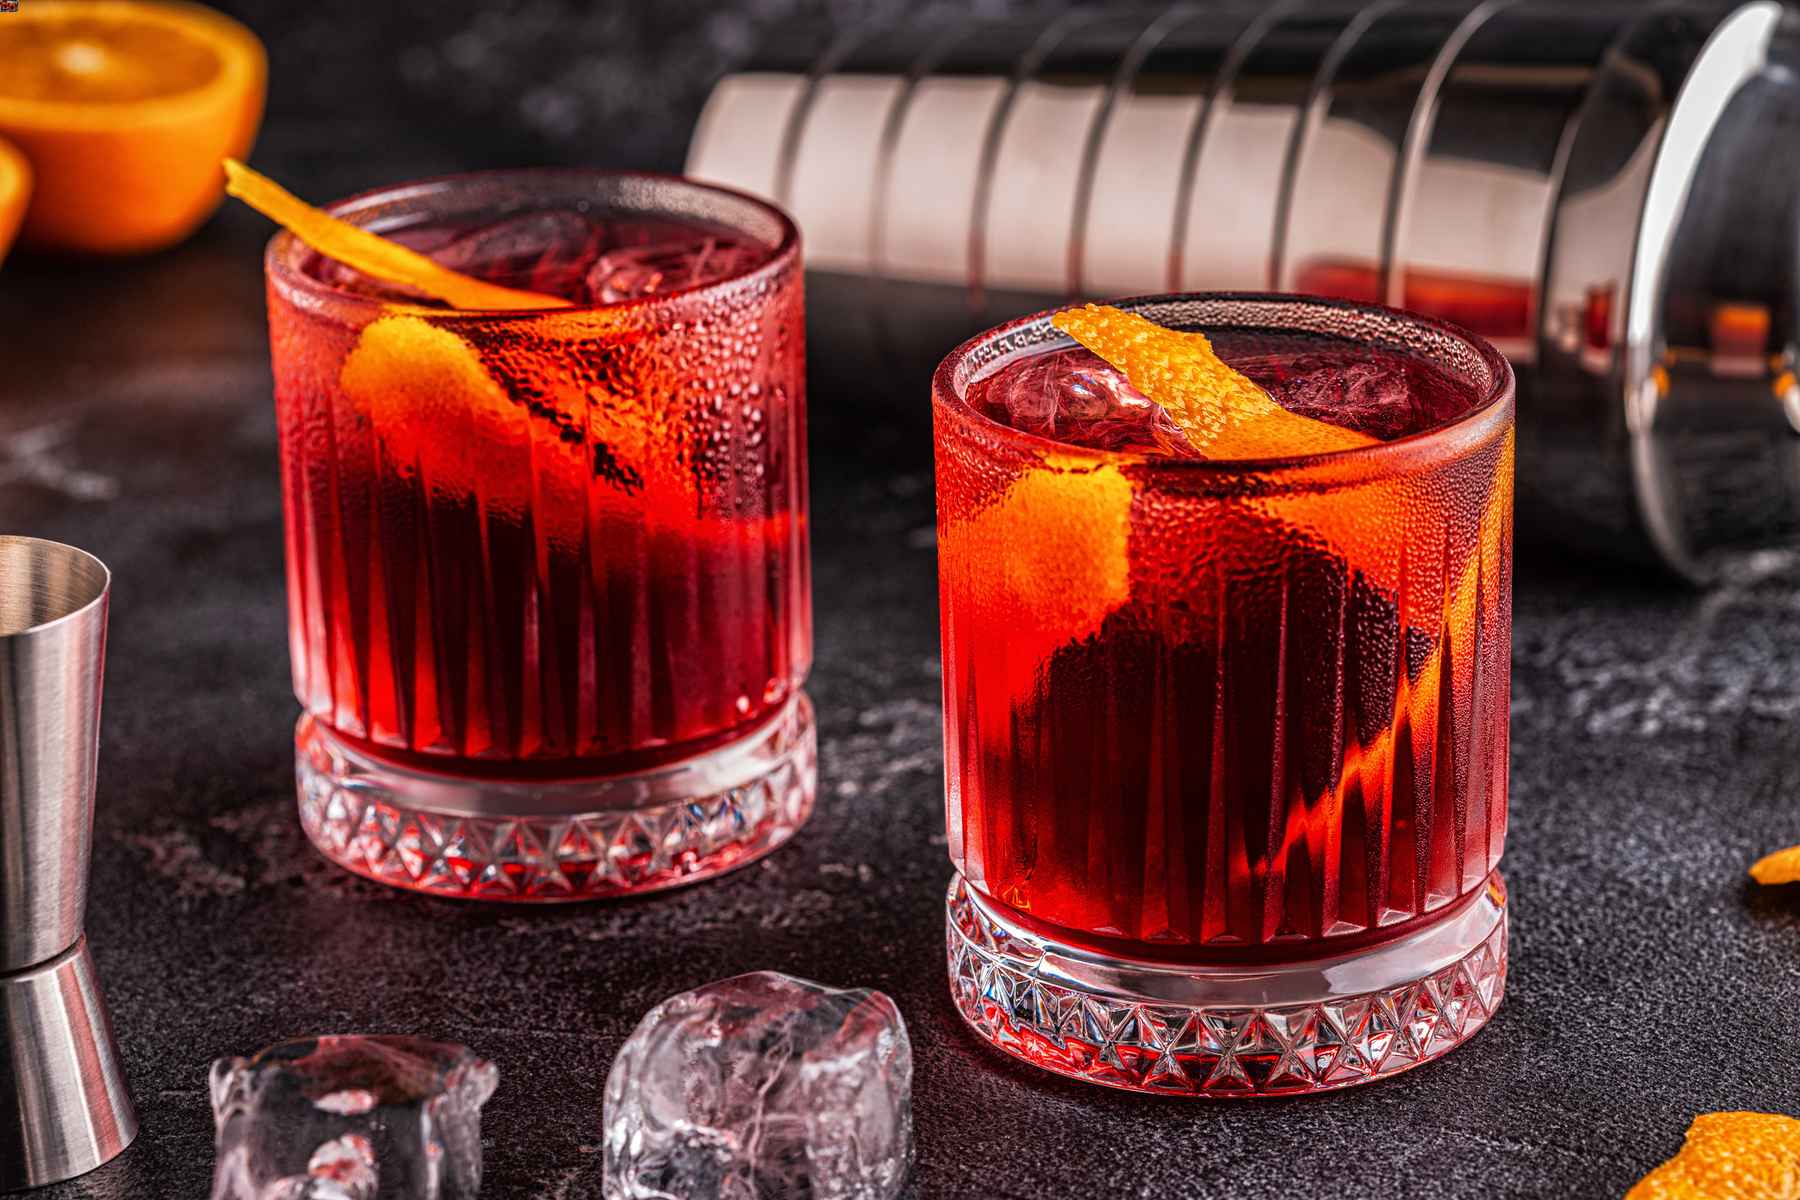 Two glasses filled with Negroni cocktails and garnished with orange peel.